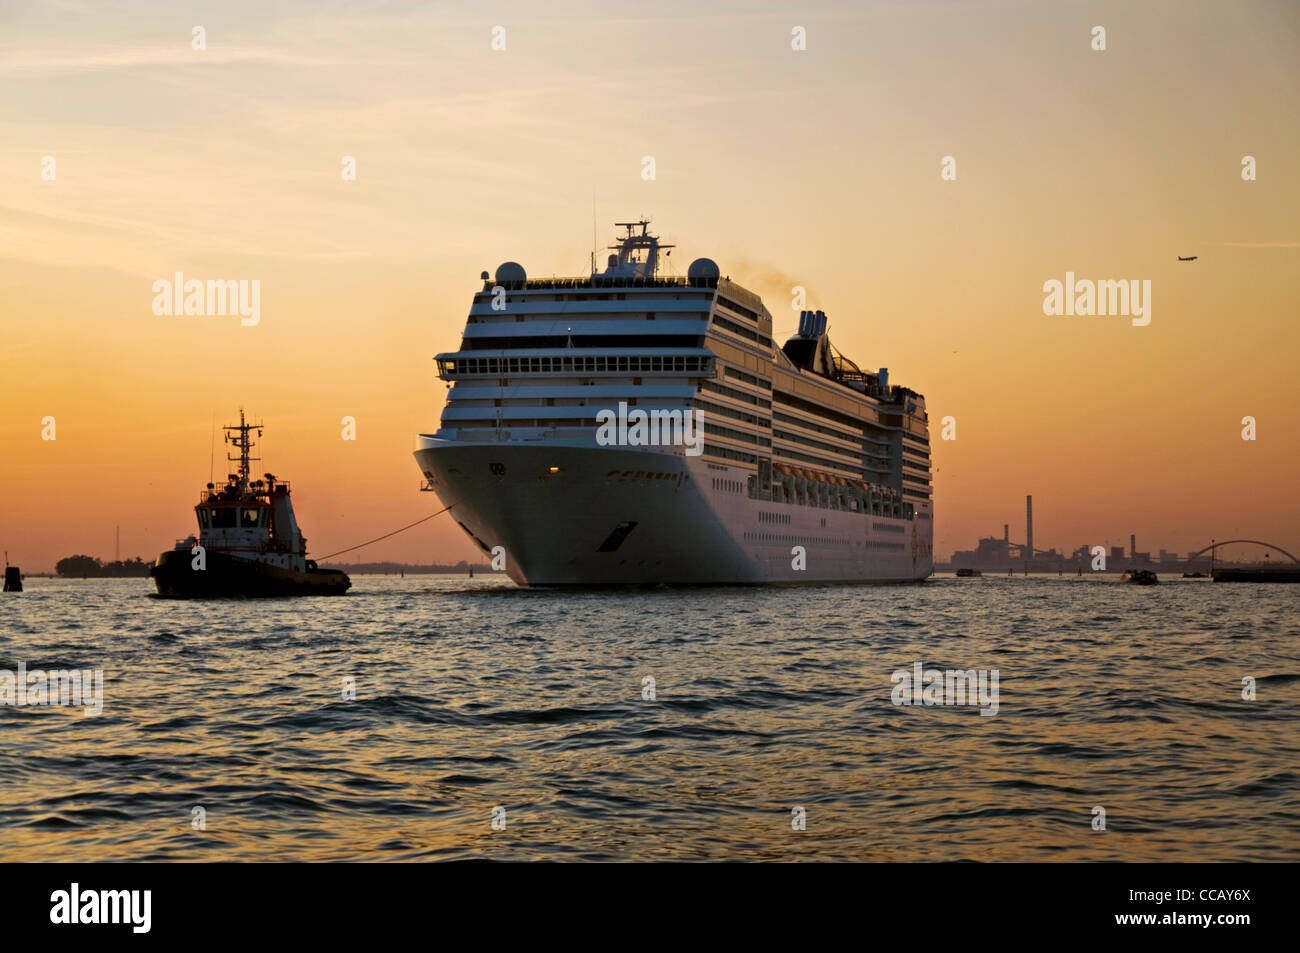 Cruise liner ship MSC Musica leaves Venice under tow from tugboat Stock Photo